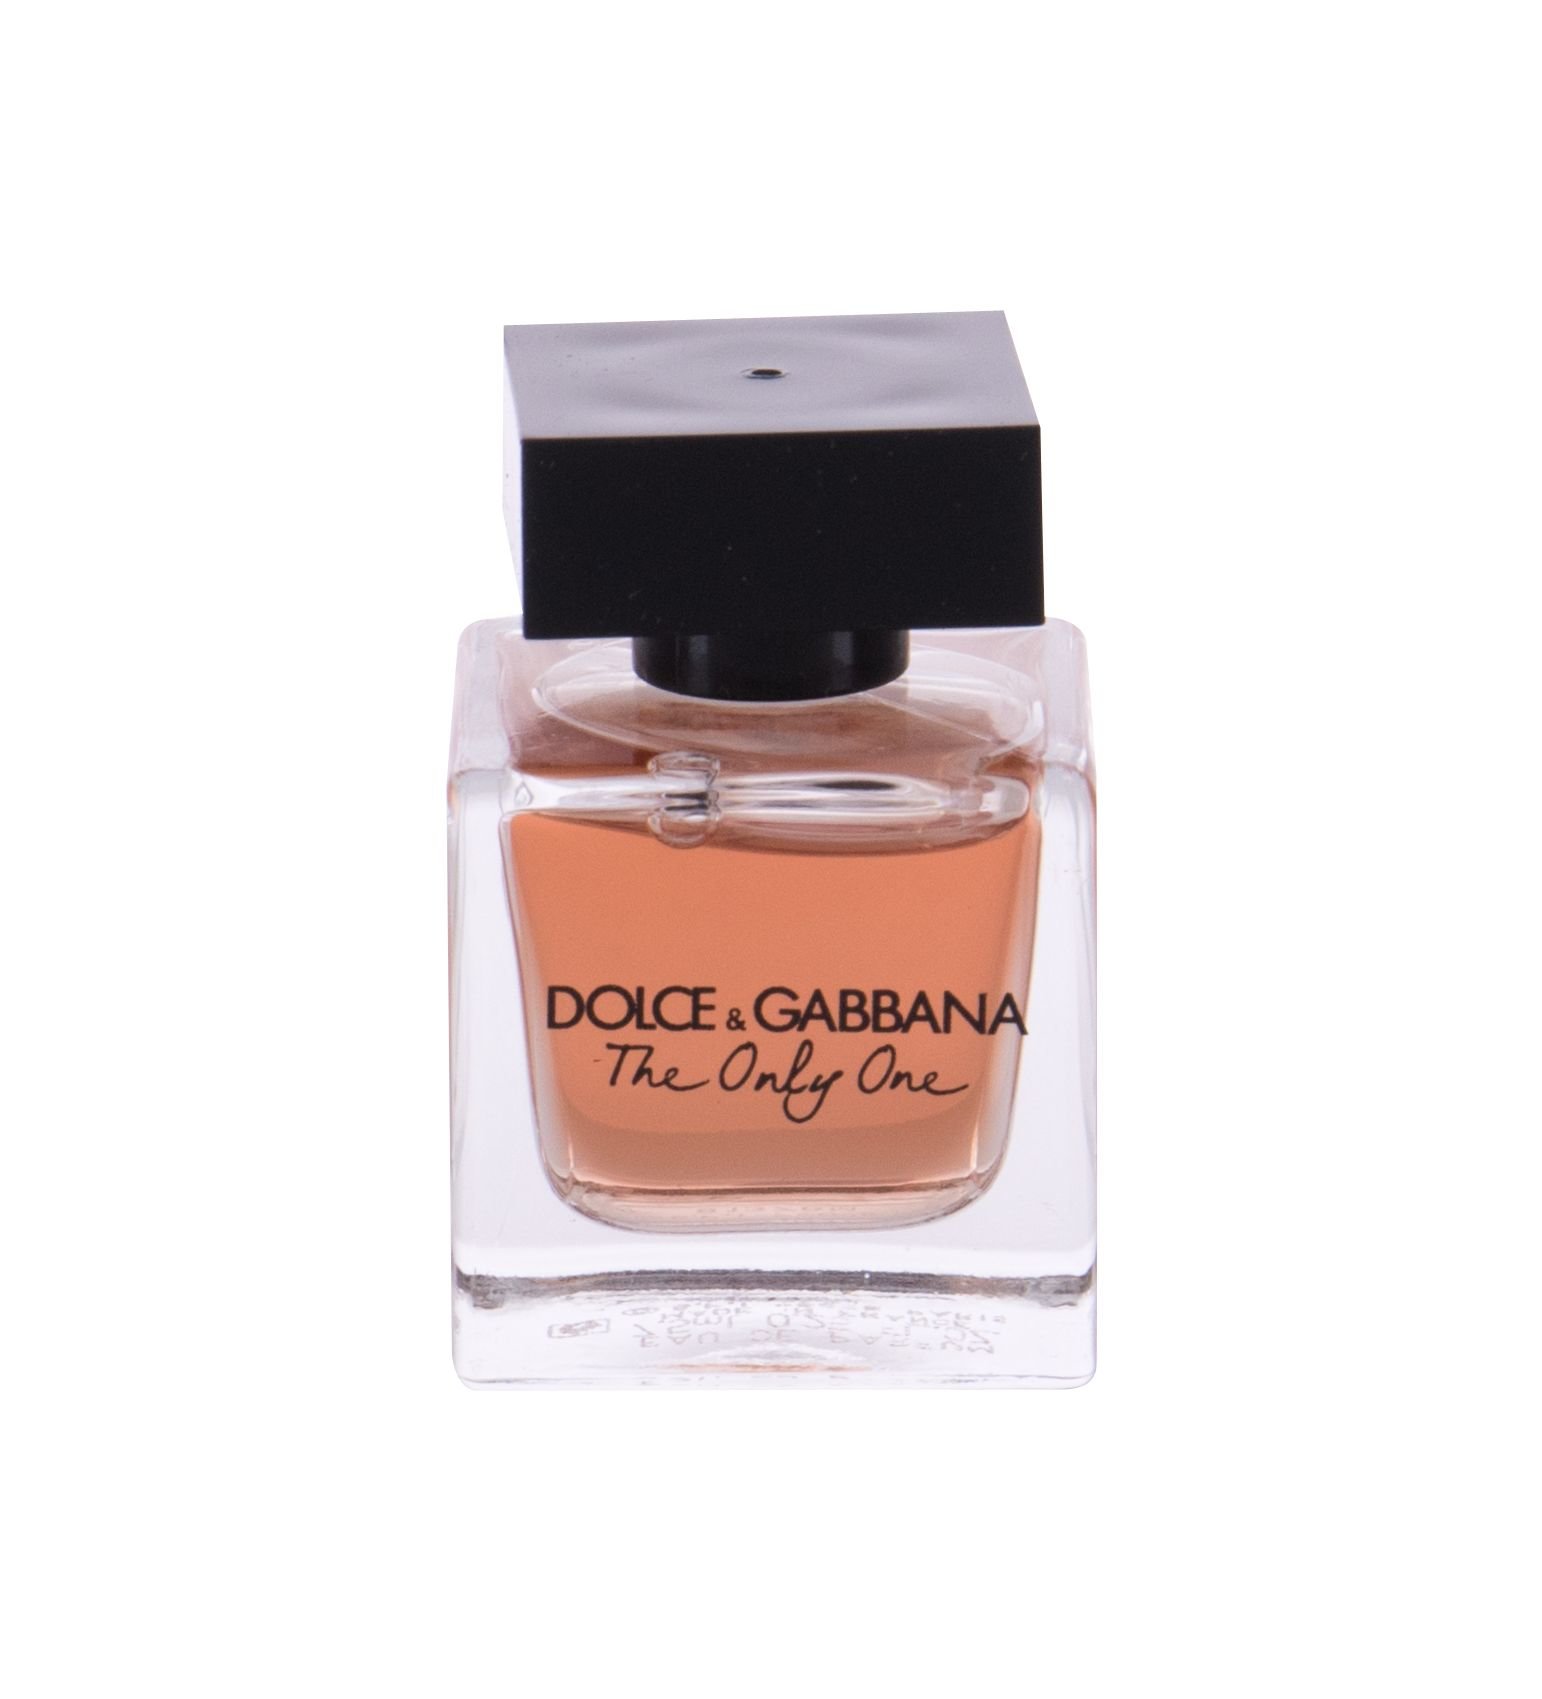 Dolce&Gabbana The Only One, edp 7,5ml